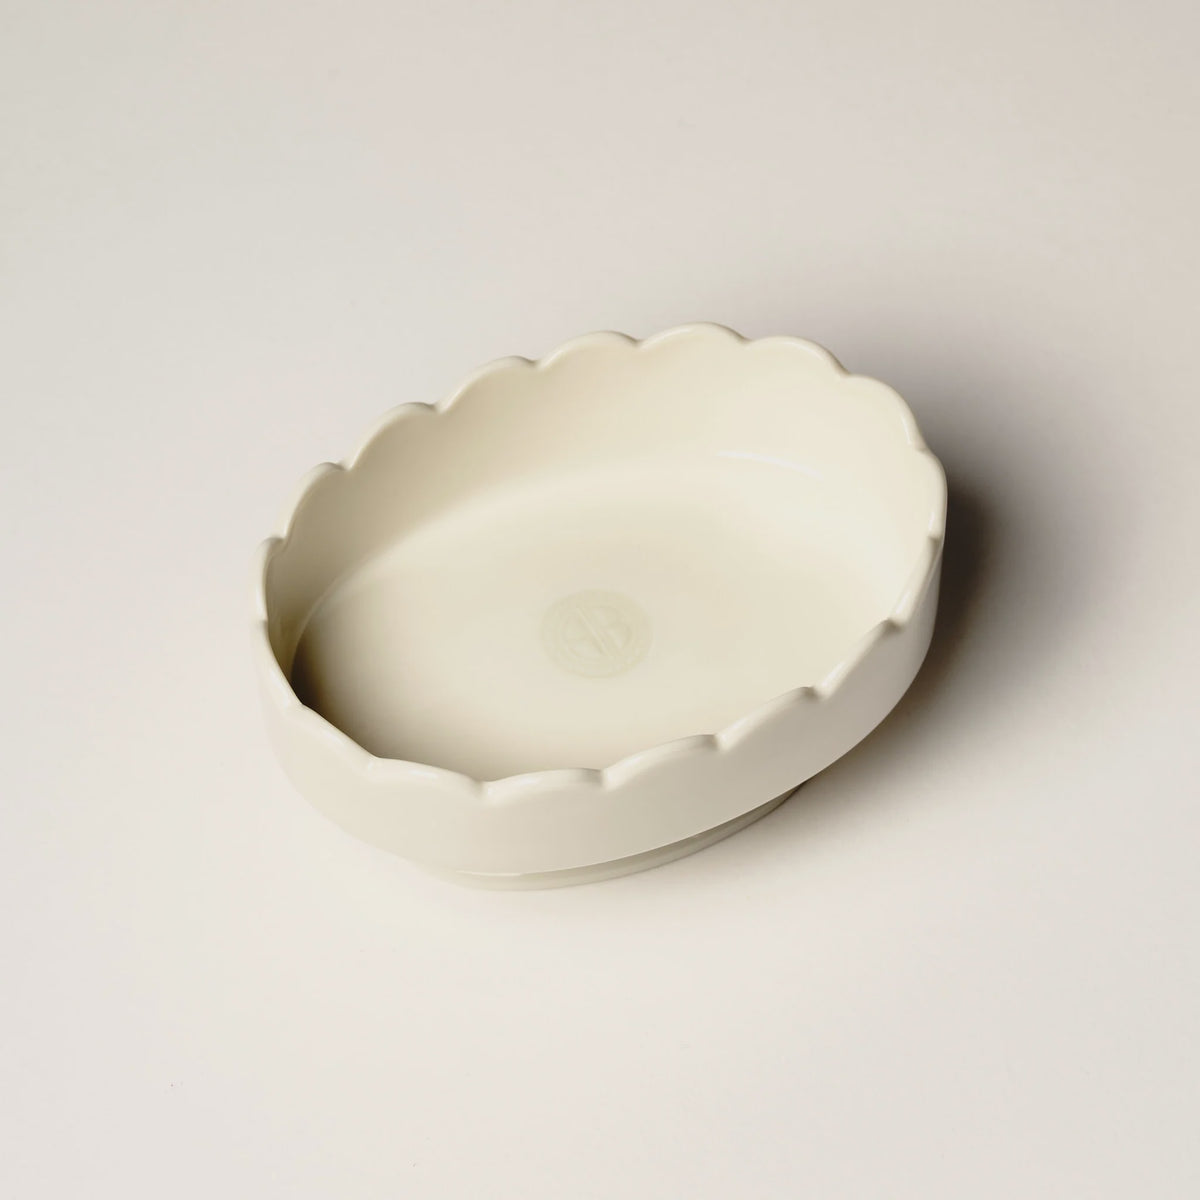 The Oval Soap Dish